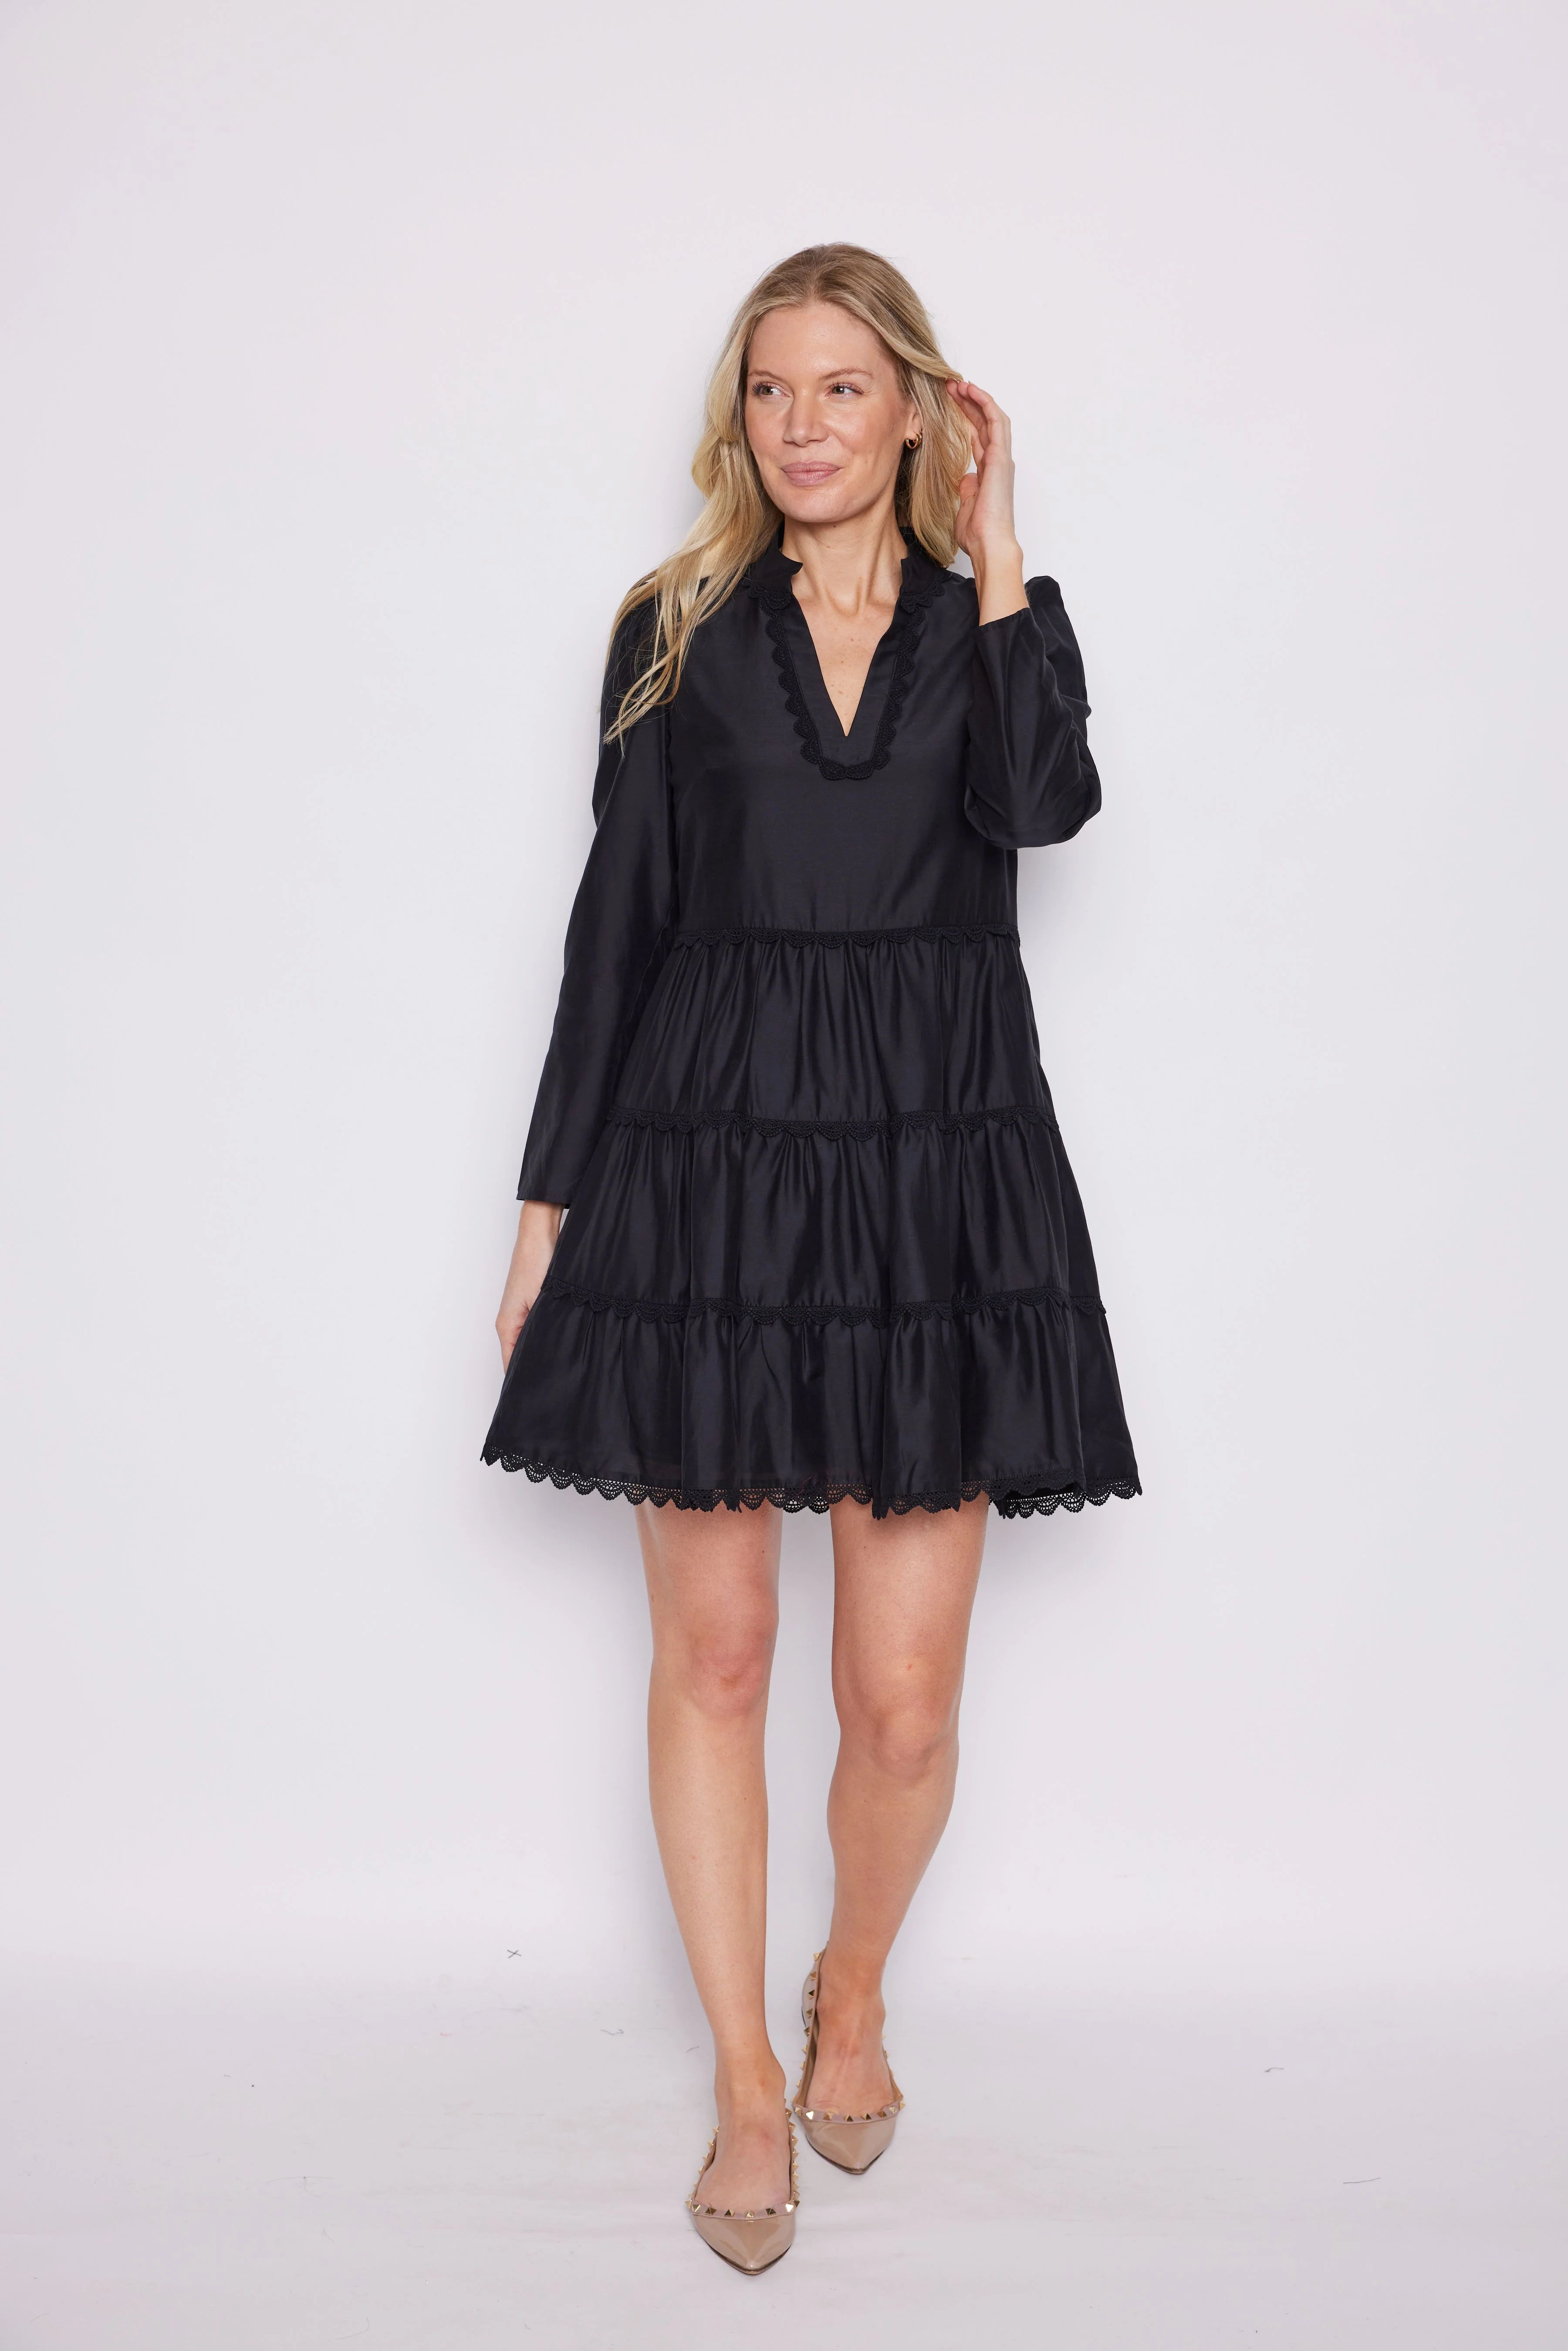 Black Lace Trim Long Sleeve Tunic Flare Dress | Sail to Sable